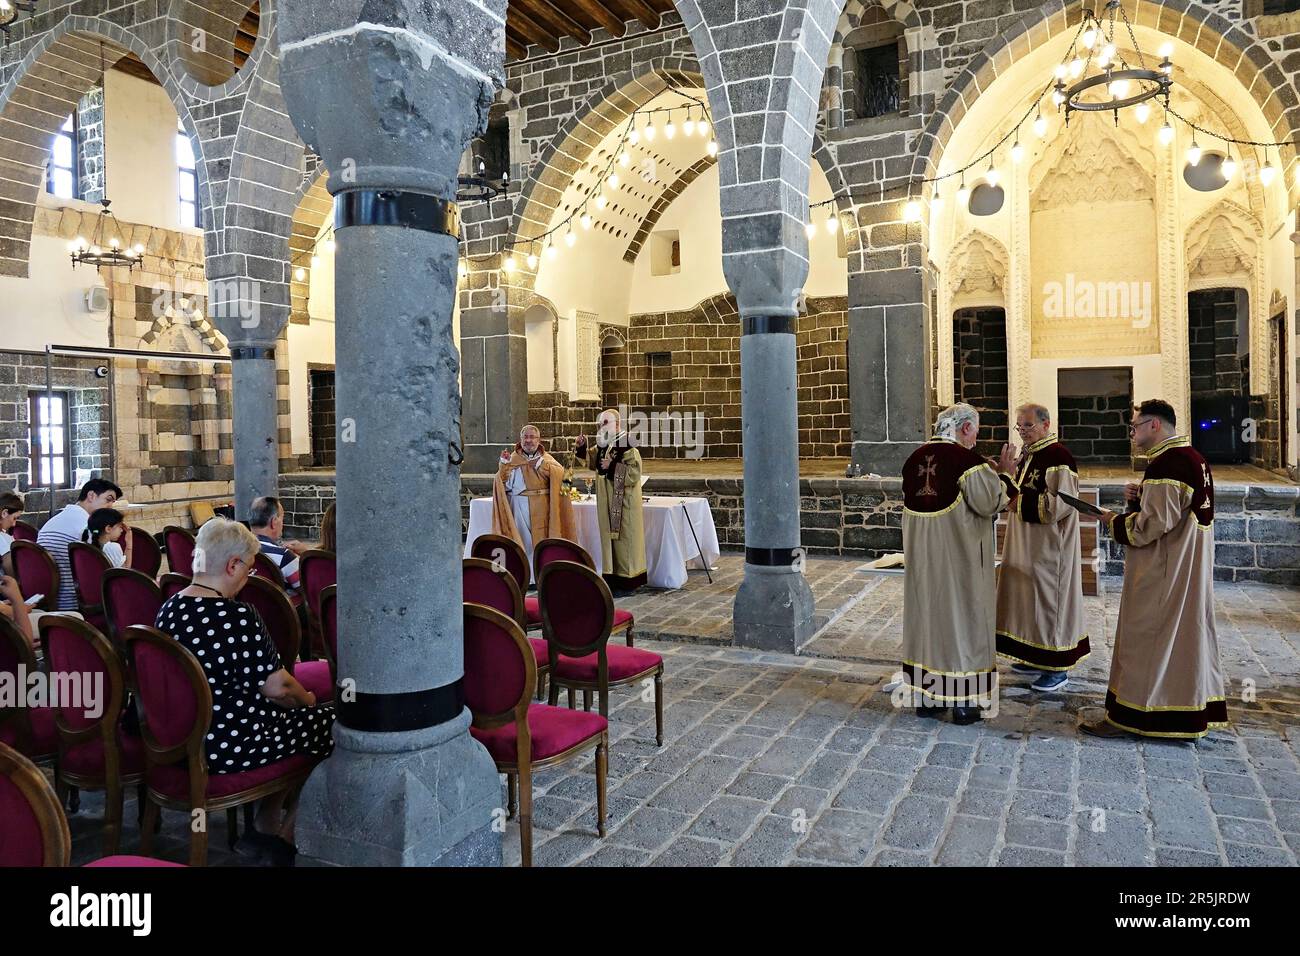 People attend the ritual at Diyarbak?r Surp Hovsep Church. At the Surp Hovsep Armenian Catholic Church, which was heavily damaged in clashes between armed Kurdish PKK militants and Turkish security forces in the center of Diyarbakir in 2015 and repaired as a result of a 4-year restoration, the second ritual in the last 100 years after the first ritual in 2021. Very few Armenians who came from Istanbul and lived in Diyarbakir attended the ceremony. The ritual was led by Senior Priest Abraham Firat and Subordinate Deacon Jan Acemoglu, who were ordained from Istanbul. The church is used today as Stock Photo